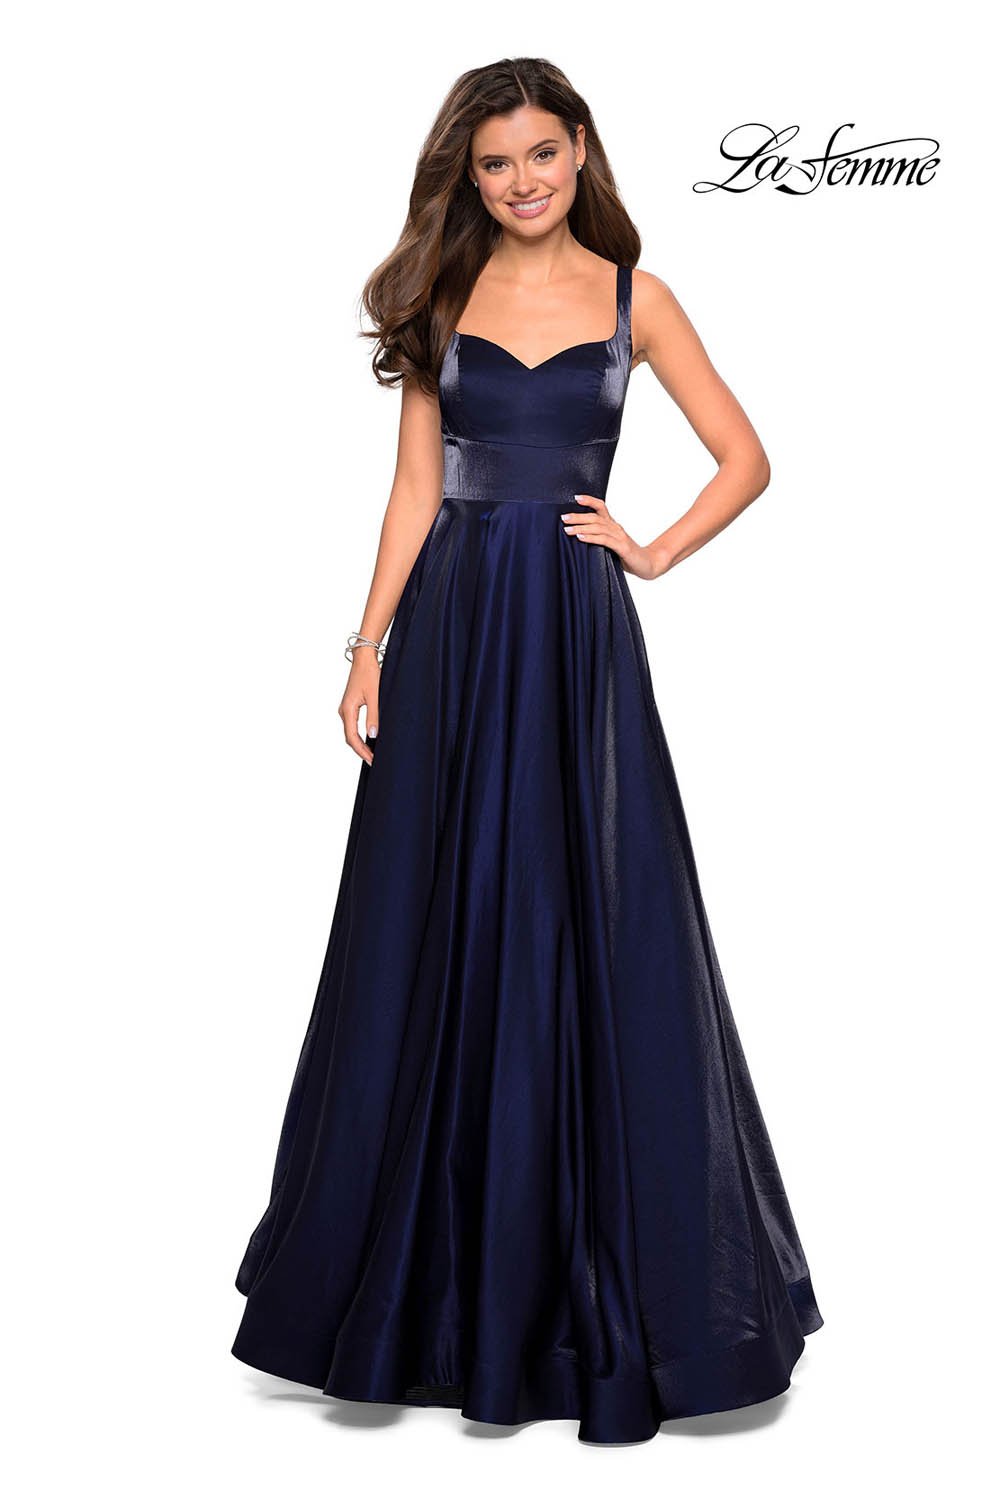 La Femme 27227 dress images in these colors: Navy, Purple, Red.